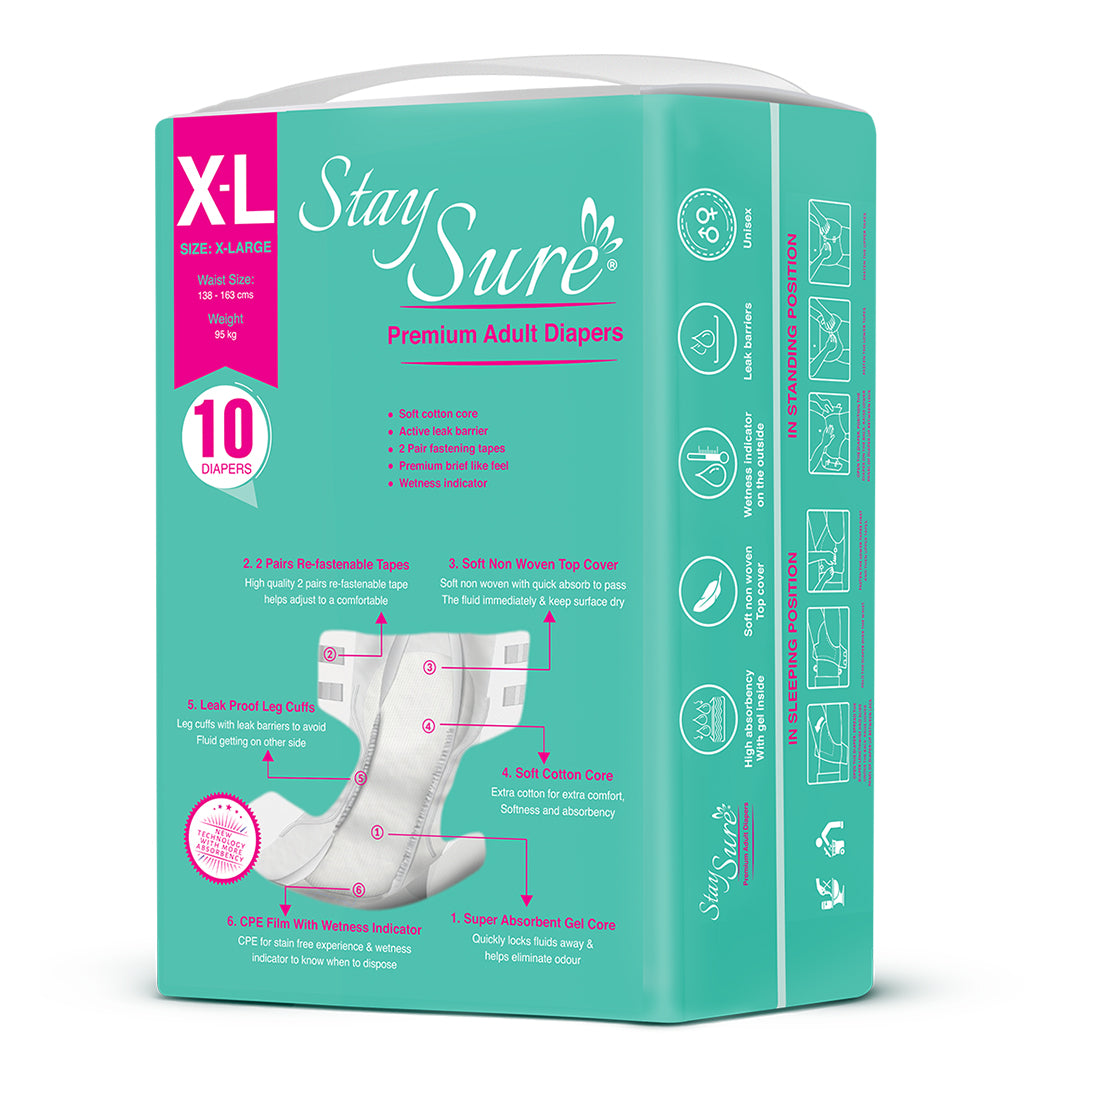 STAYSURE ADULT DIAPER STICK TYPE PREMIUM QUALITY EXTRA LARGE SIZE PACK OF 10 PCS - staysure.asia